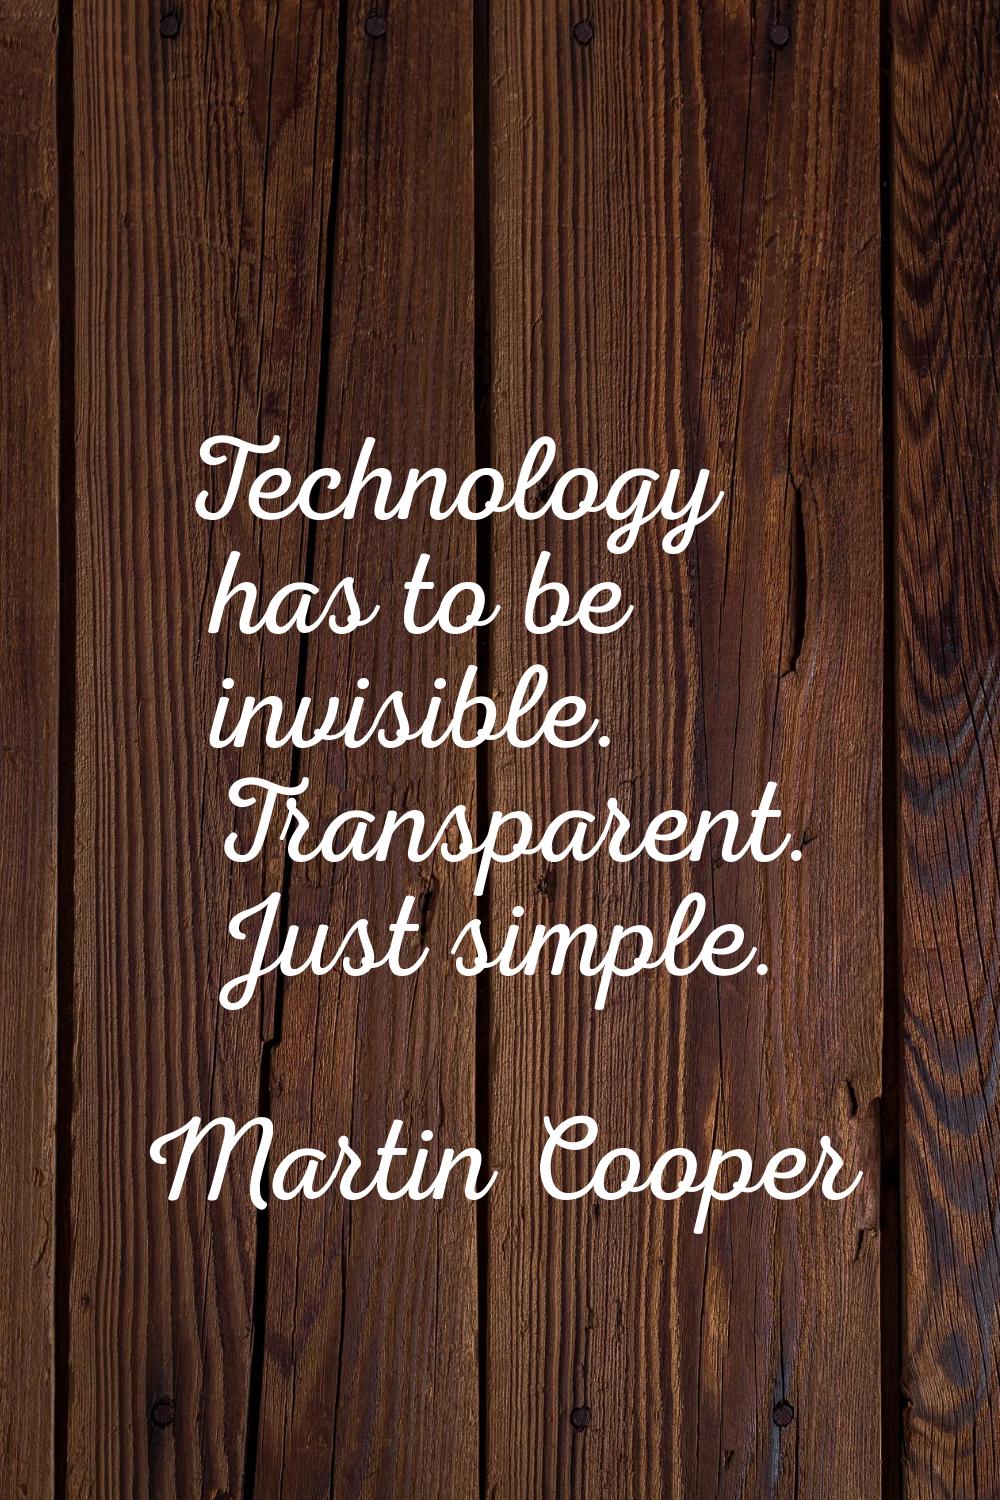 Technology has to be invisible. Transparent. Just simple.